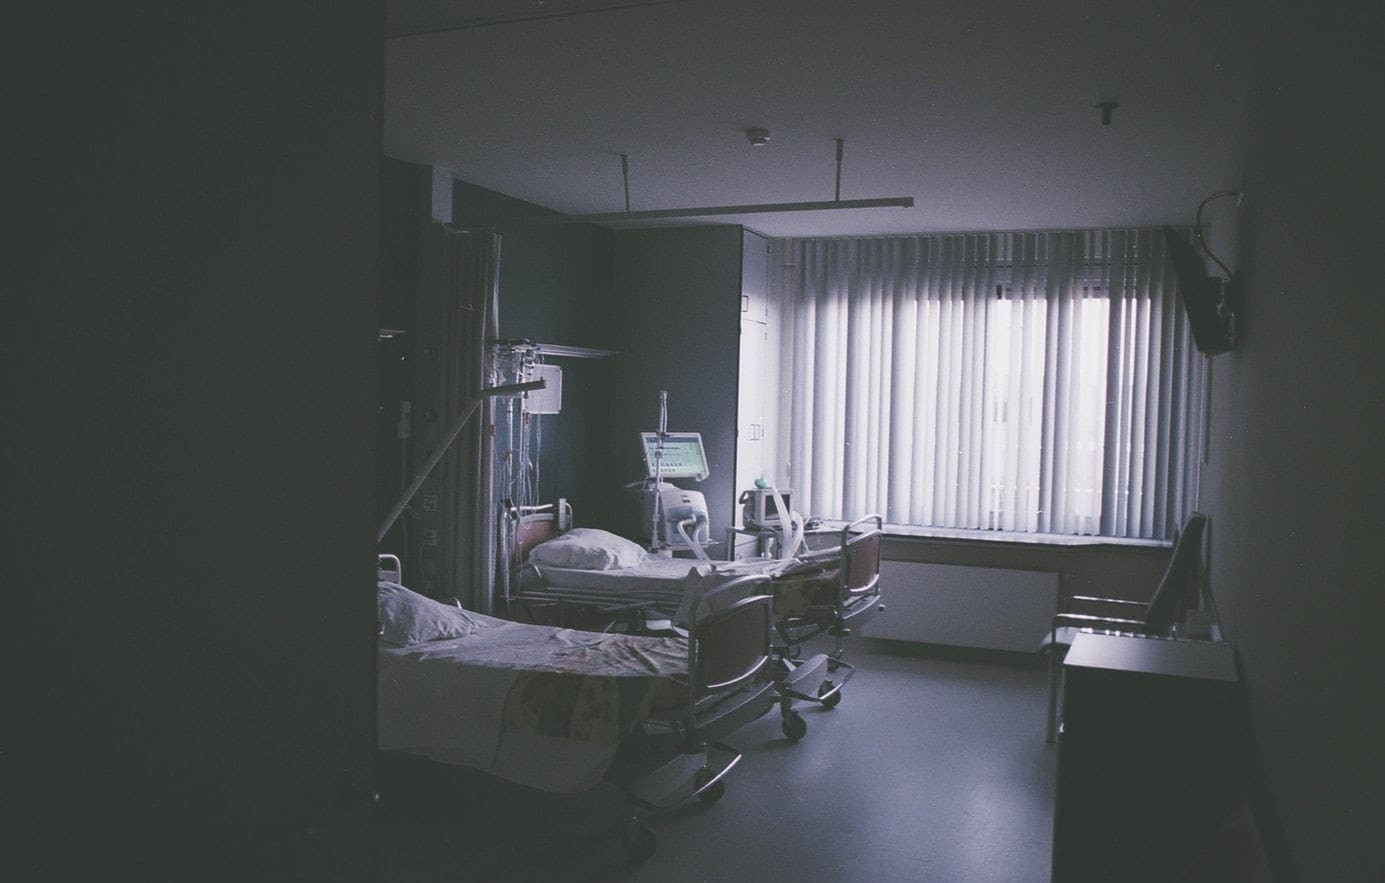 a dark and moody and ominous childrens hospital ward